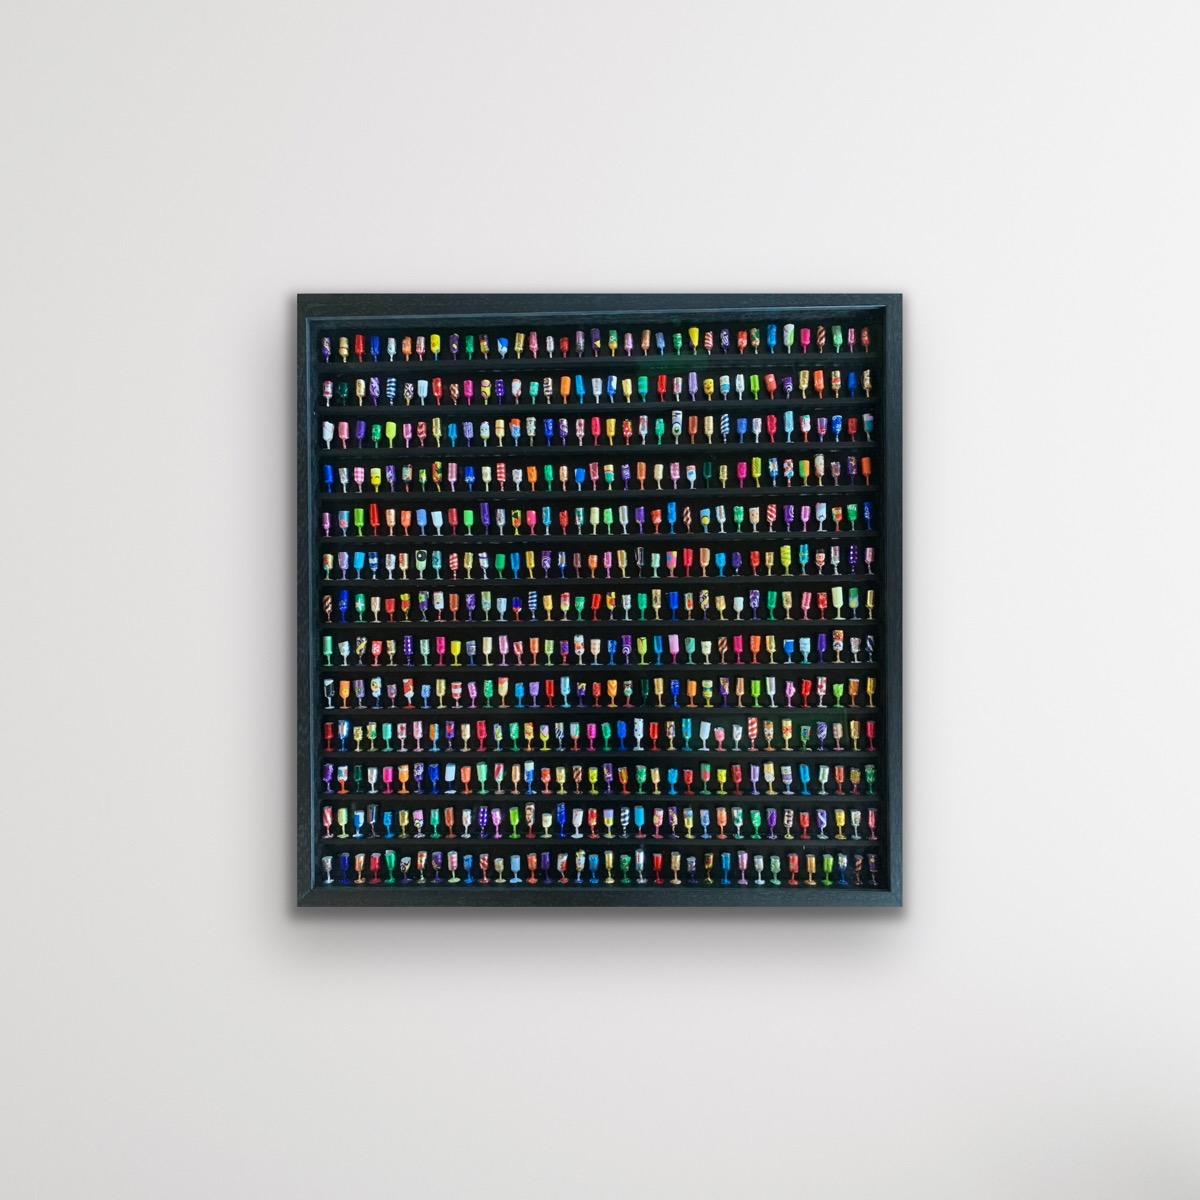 Goblets IX is a signed original wall sculpture made from sweet wrappers by Joanne Tinker of a selection of colourful wine goblets on a black shelved frame.

Additional information:
Goblets XXIV by Joanne Tinker [2022]
Sweet Wrappers
Image size: H:64